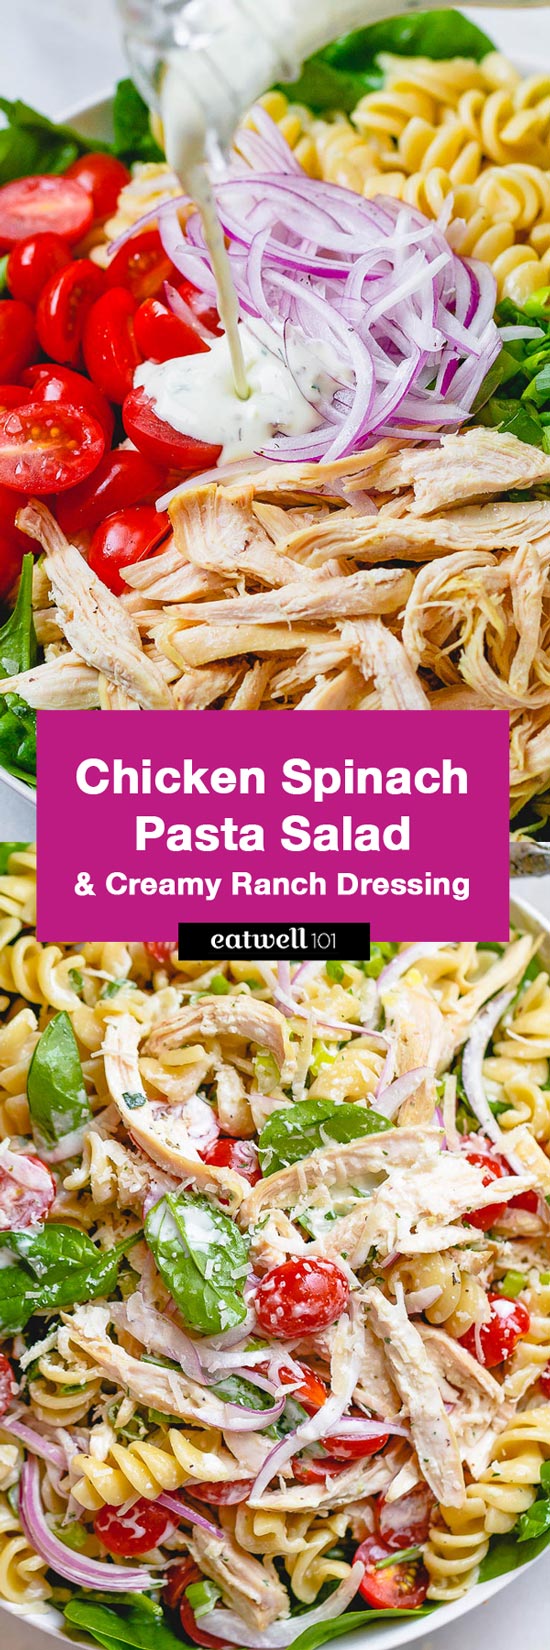 Chicken Pasta Salad with Creamy Ranch Dressing - #chicken #pasta #salad #eatwell101 #recipe - A total crowd pleaser, perfect for potlucks and summer get togethers.